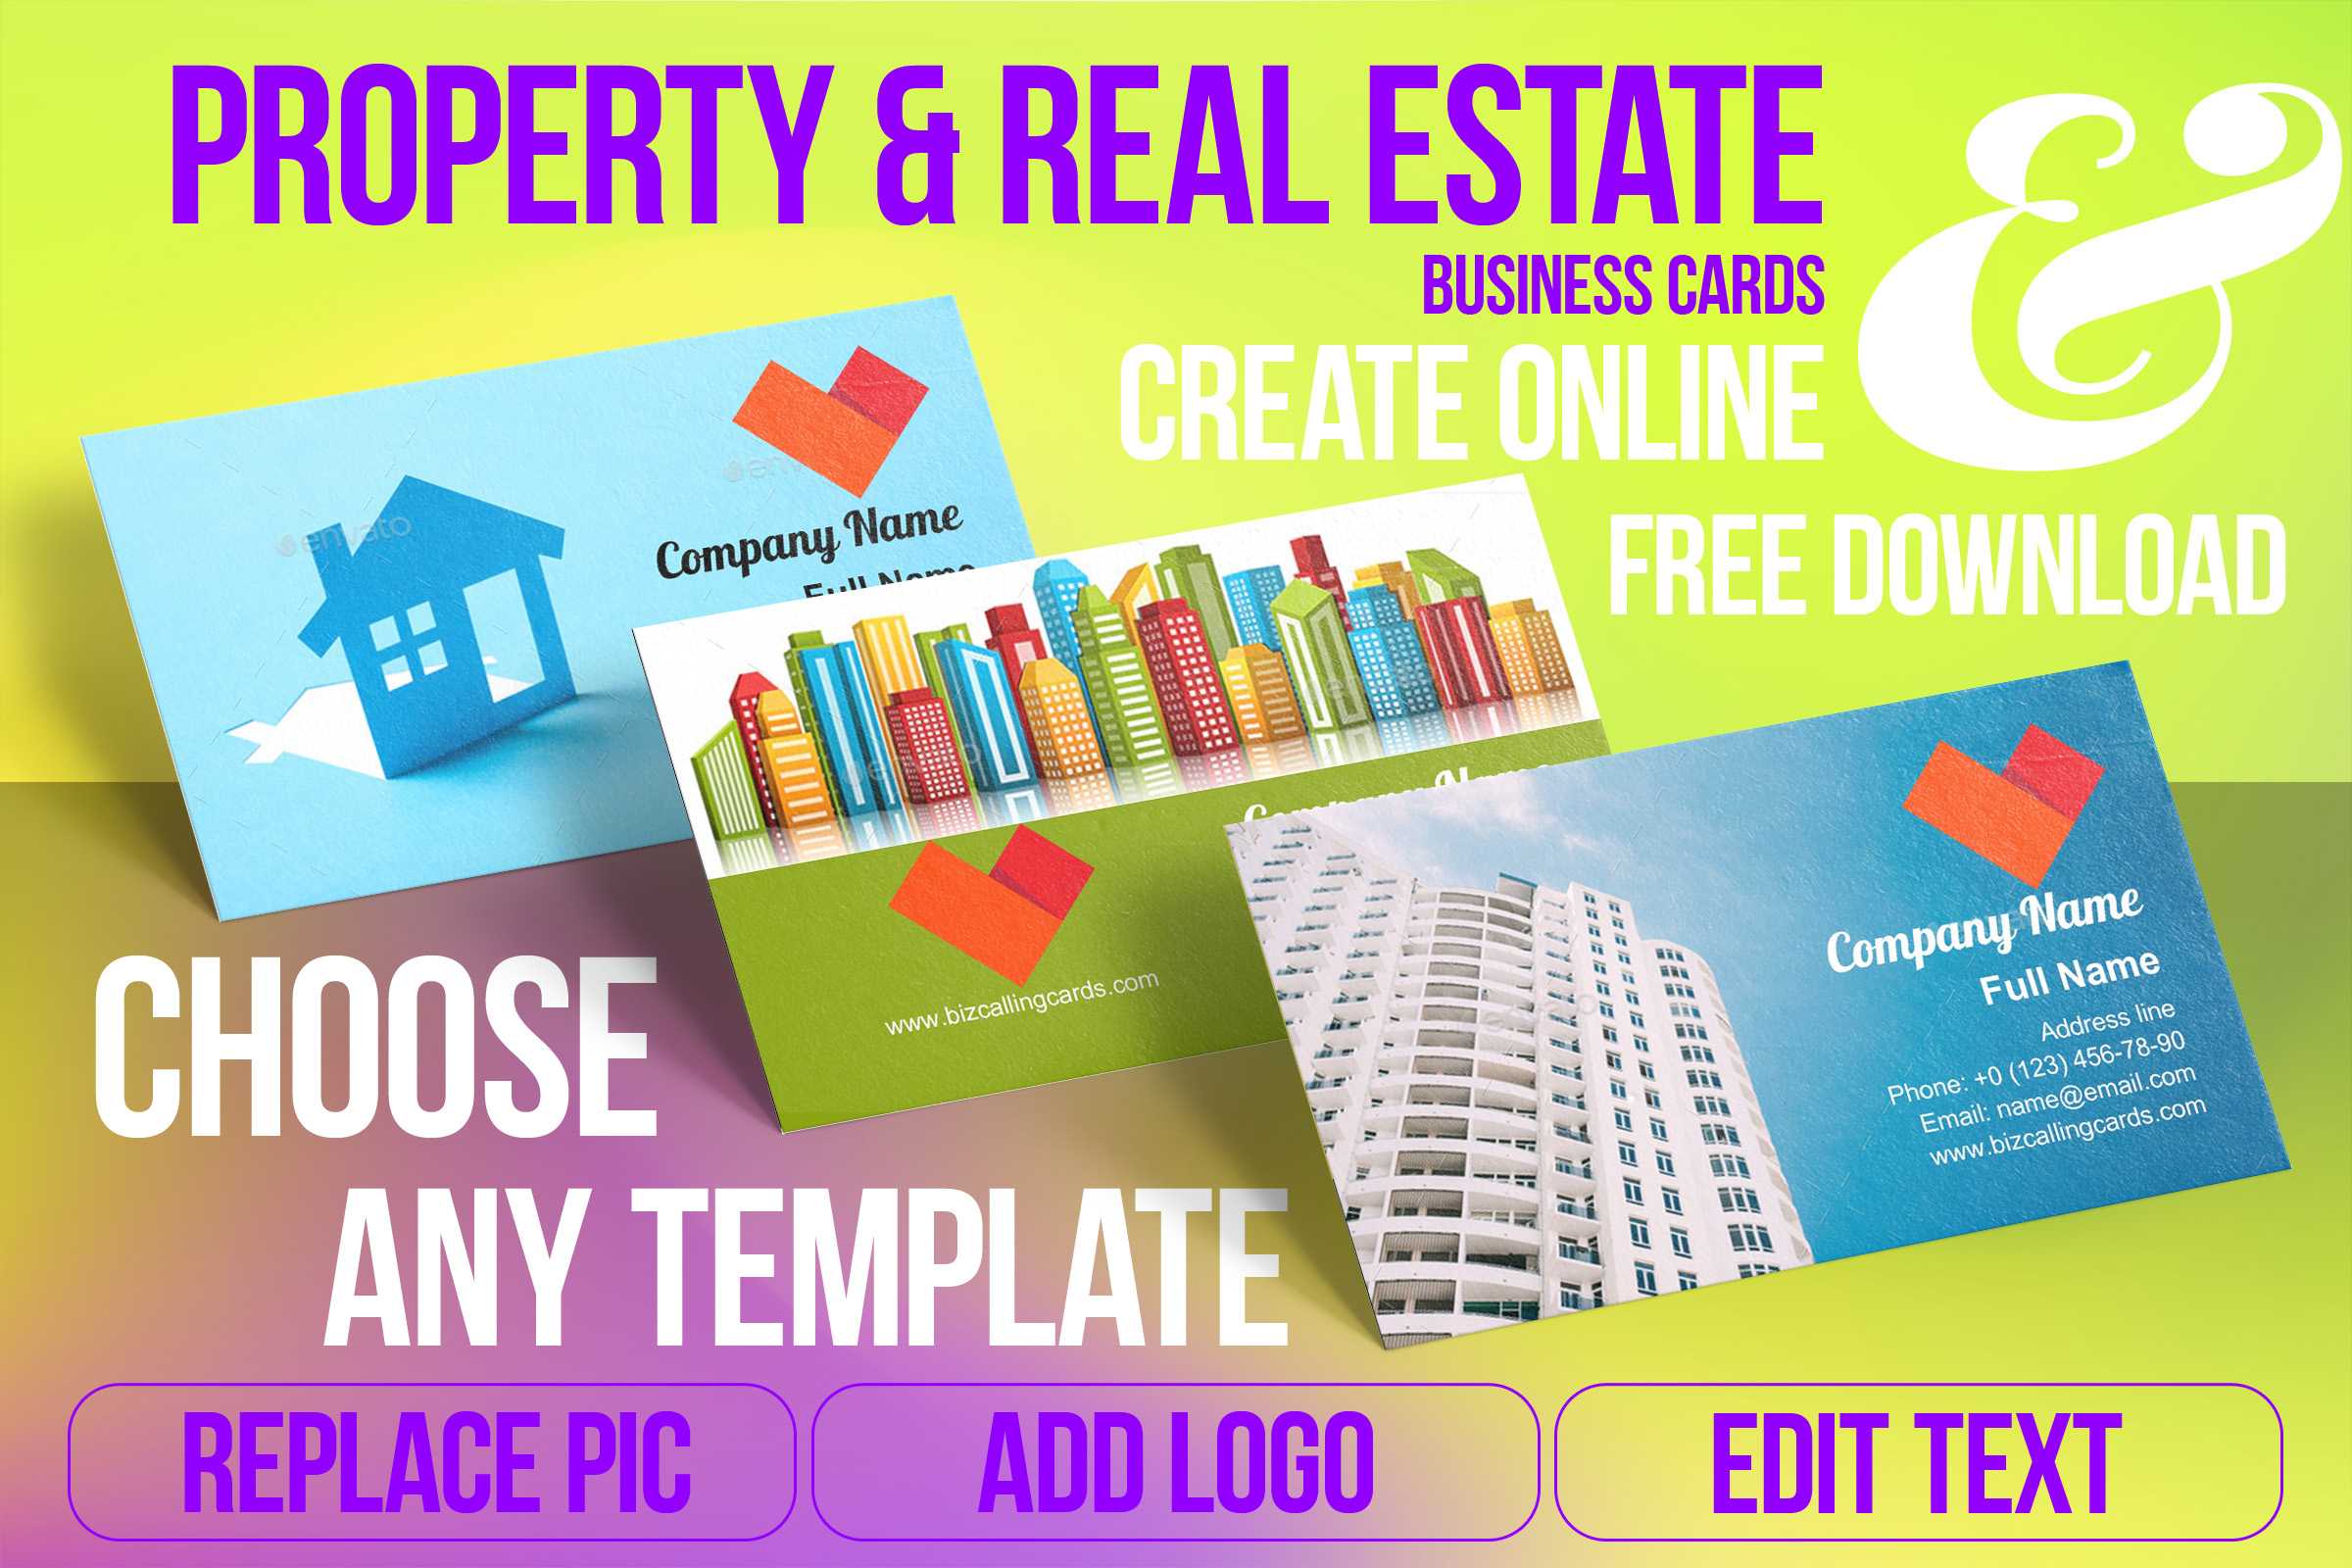 Real Estate Business Card Samples For Create Custom Design Throughout Real Estate Business Cards Templates Free